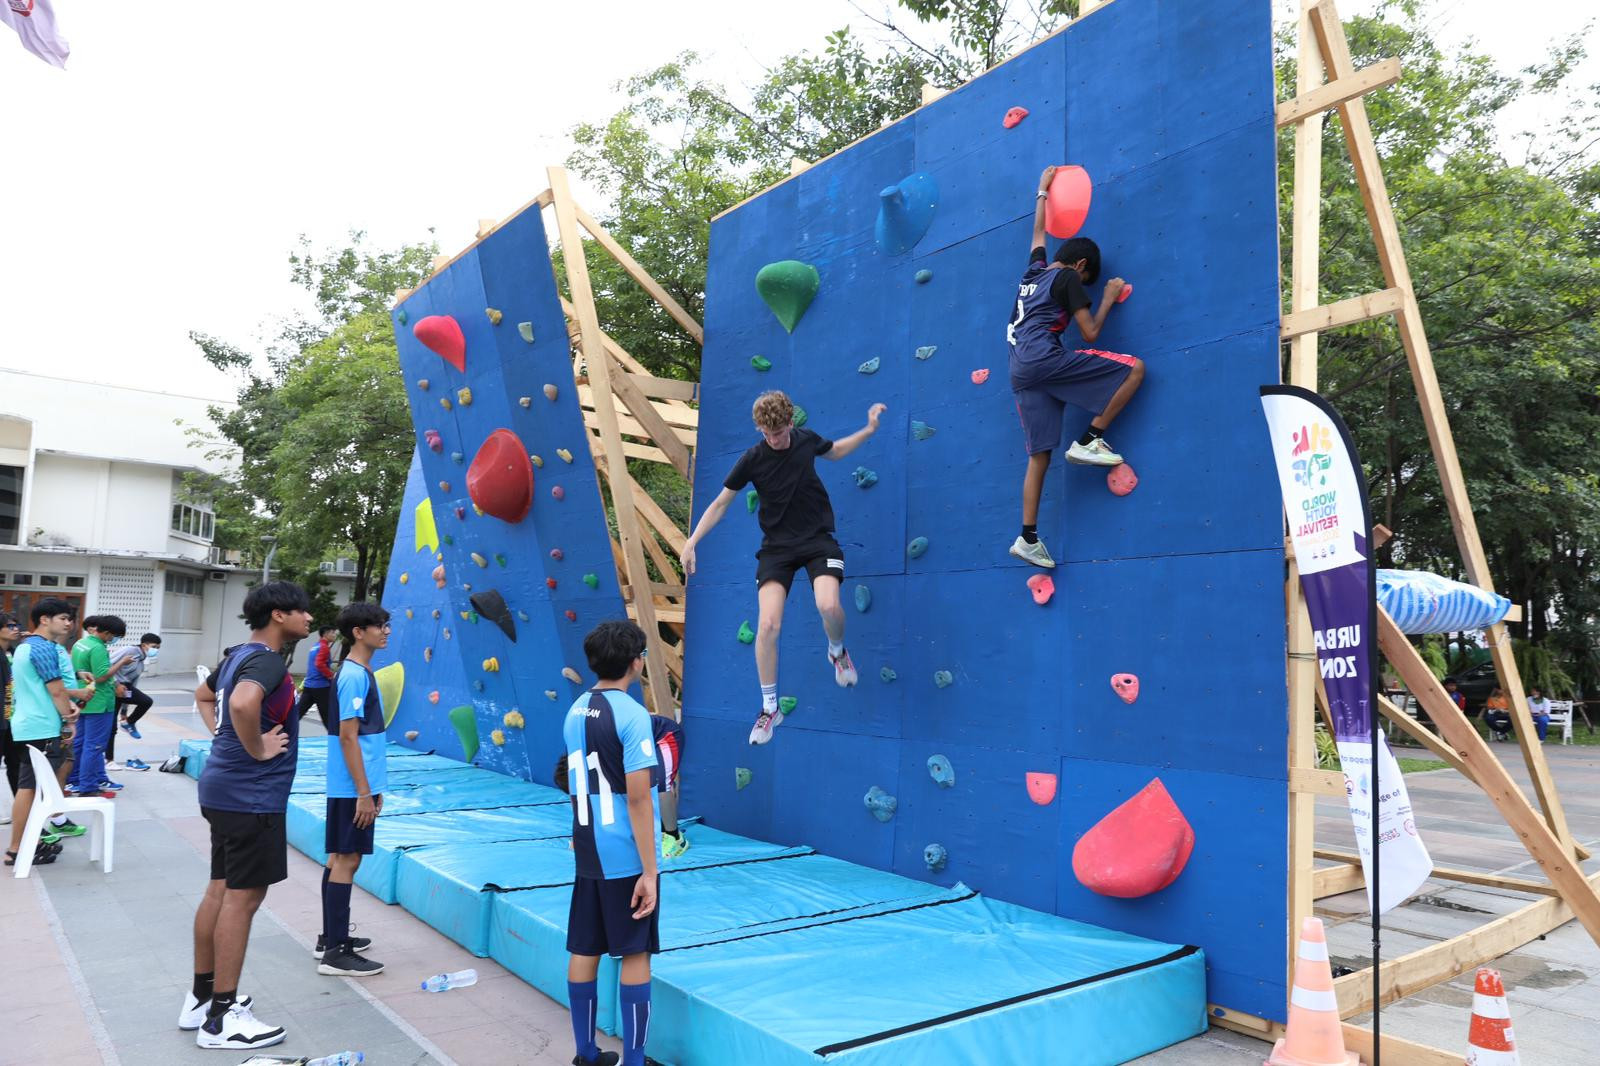 Athletes tried out sport climbing at the Bangkok Urban Games, as part of the UTS World Youth Festival ©UTS 